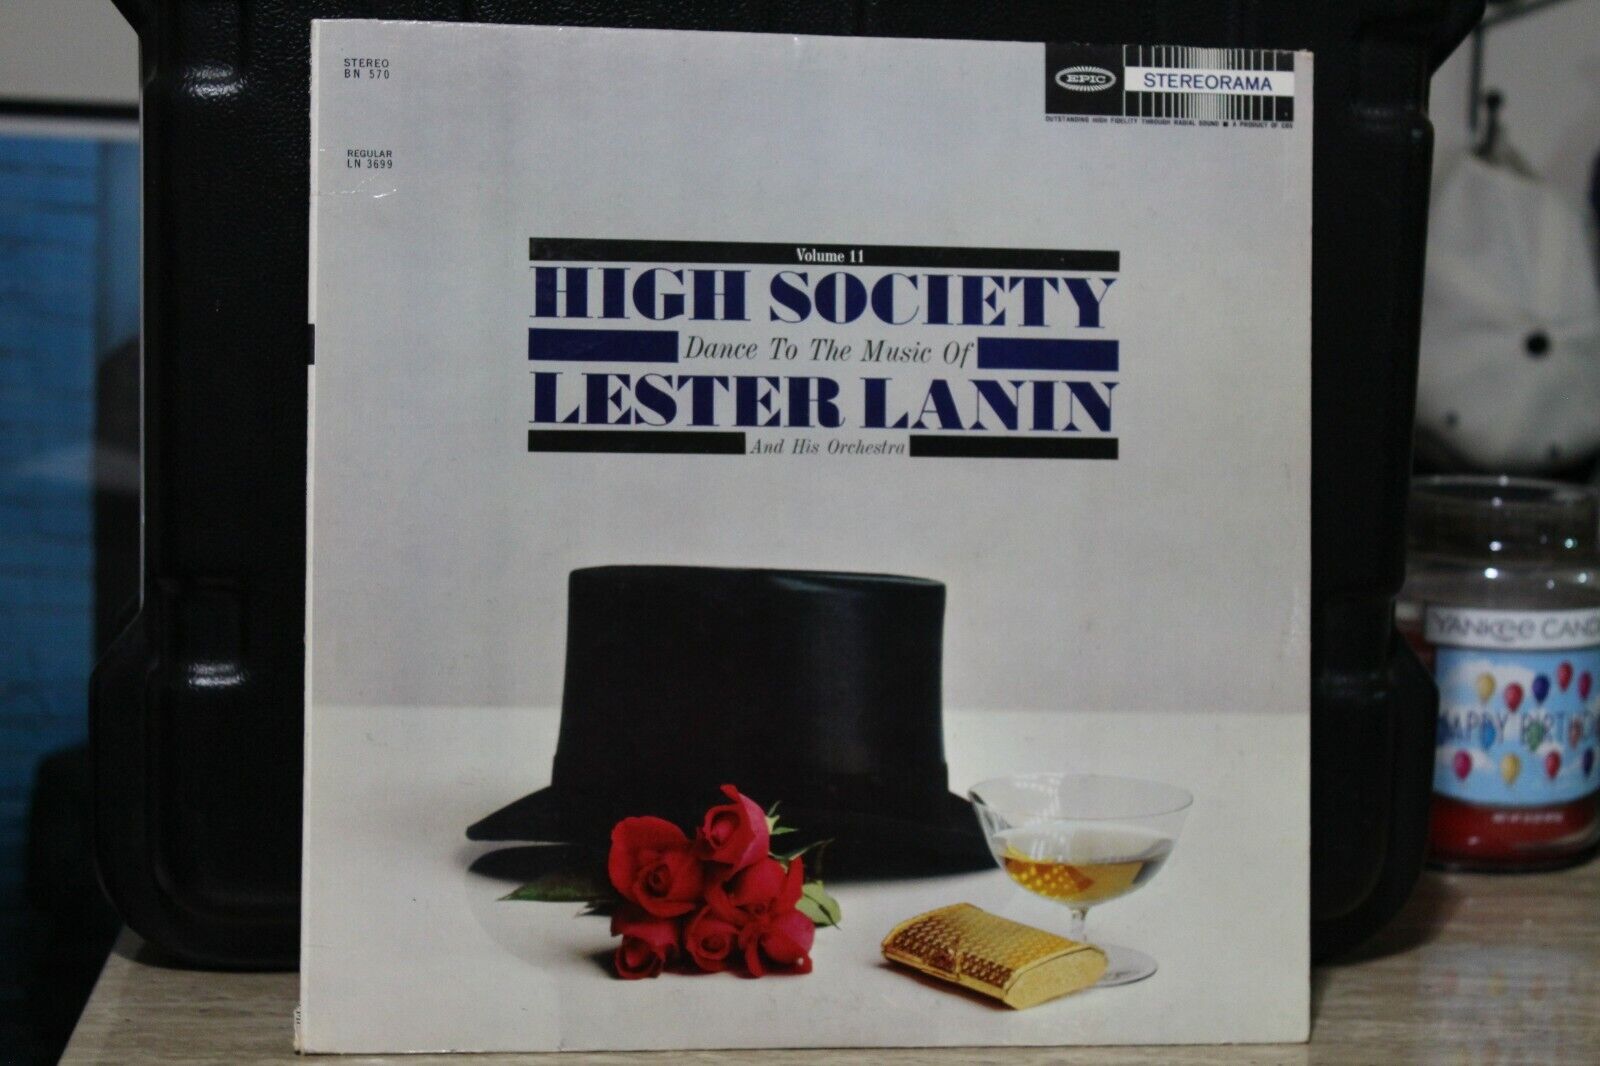 LESTER LANIN AND HIS ORCHESTRA...HIGH SOCIETY VOLUME 11 LP